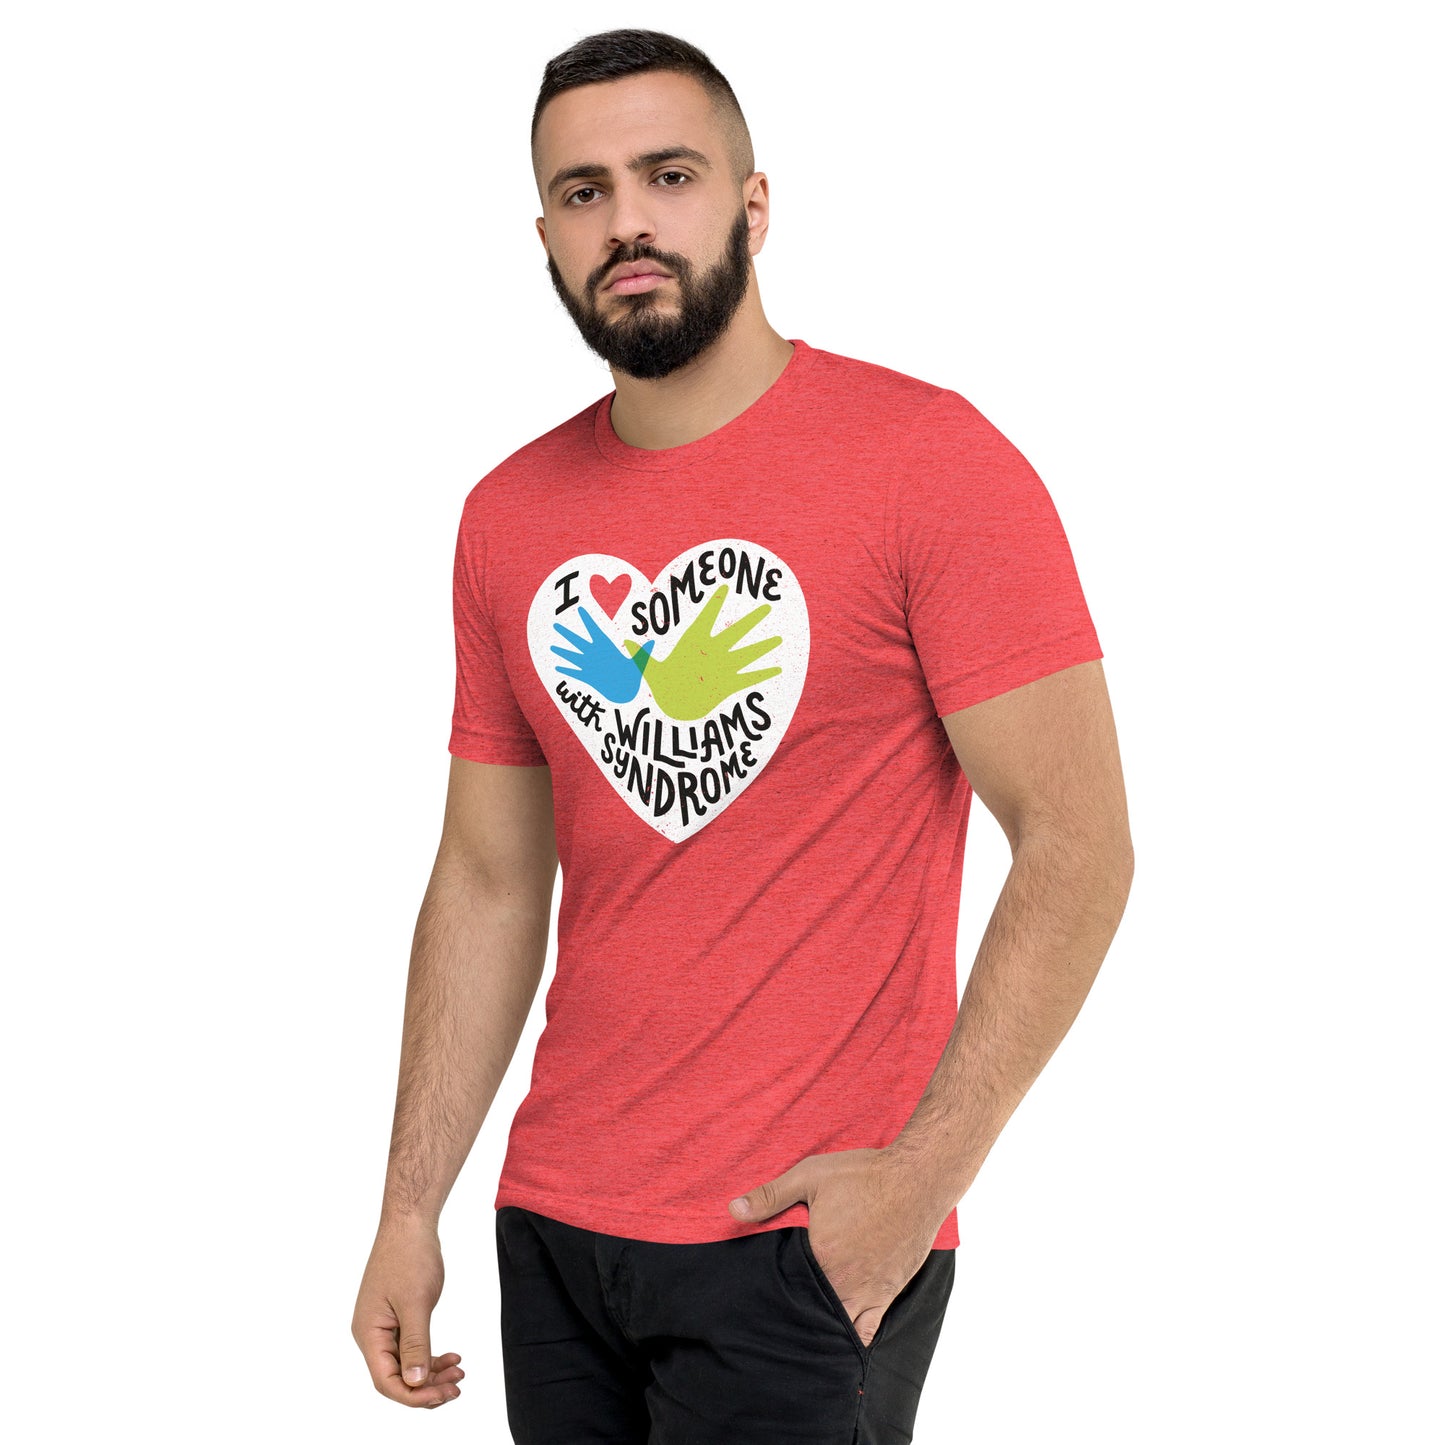 I Love Someone with Williams Syndrome — Triblend Tee